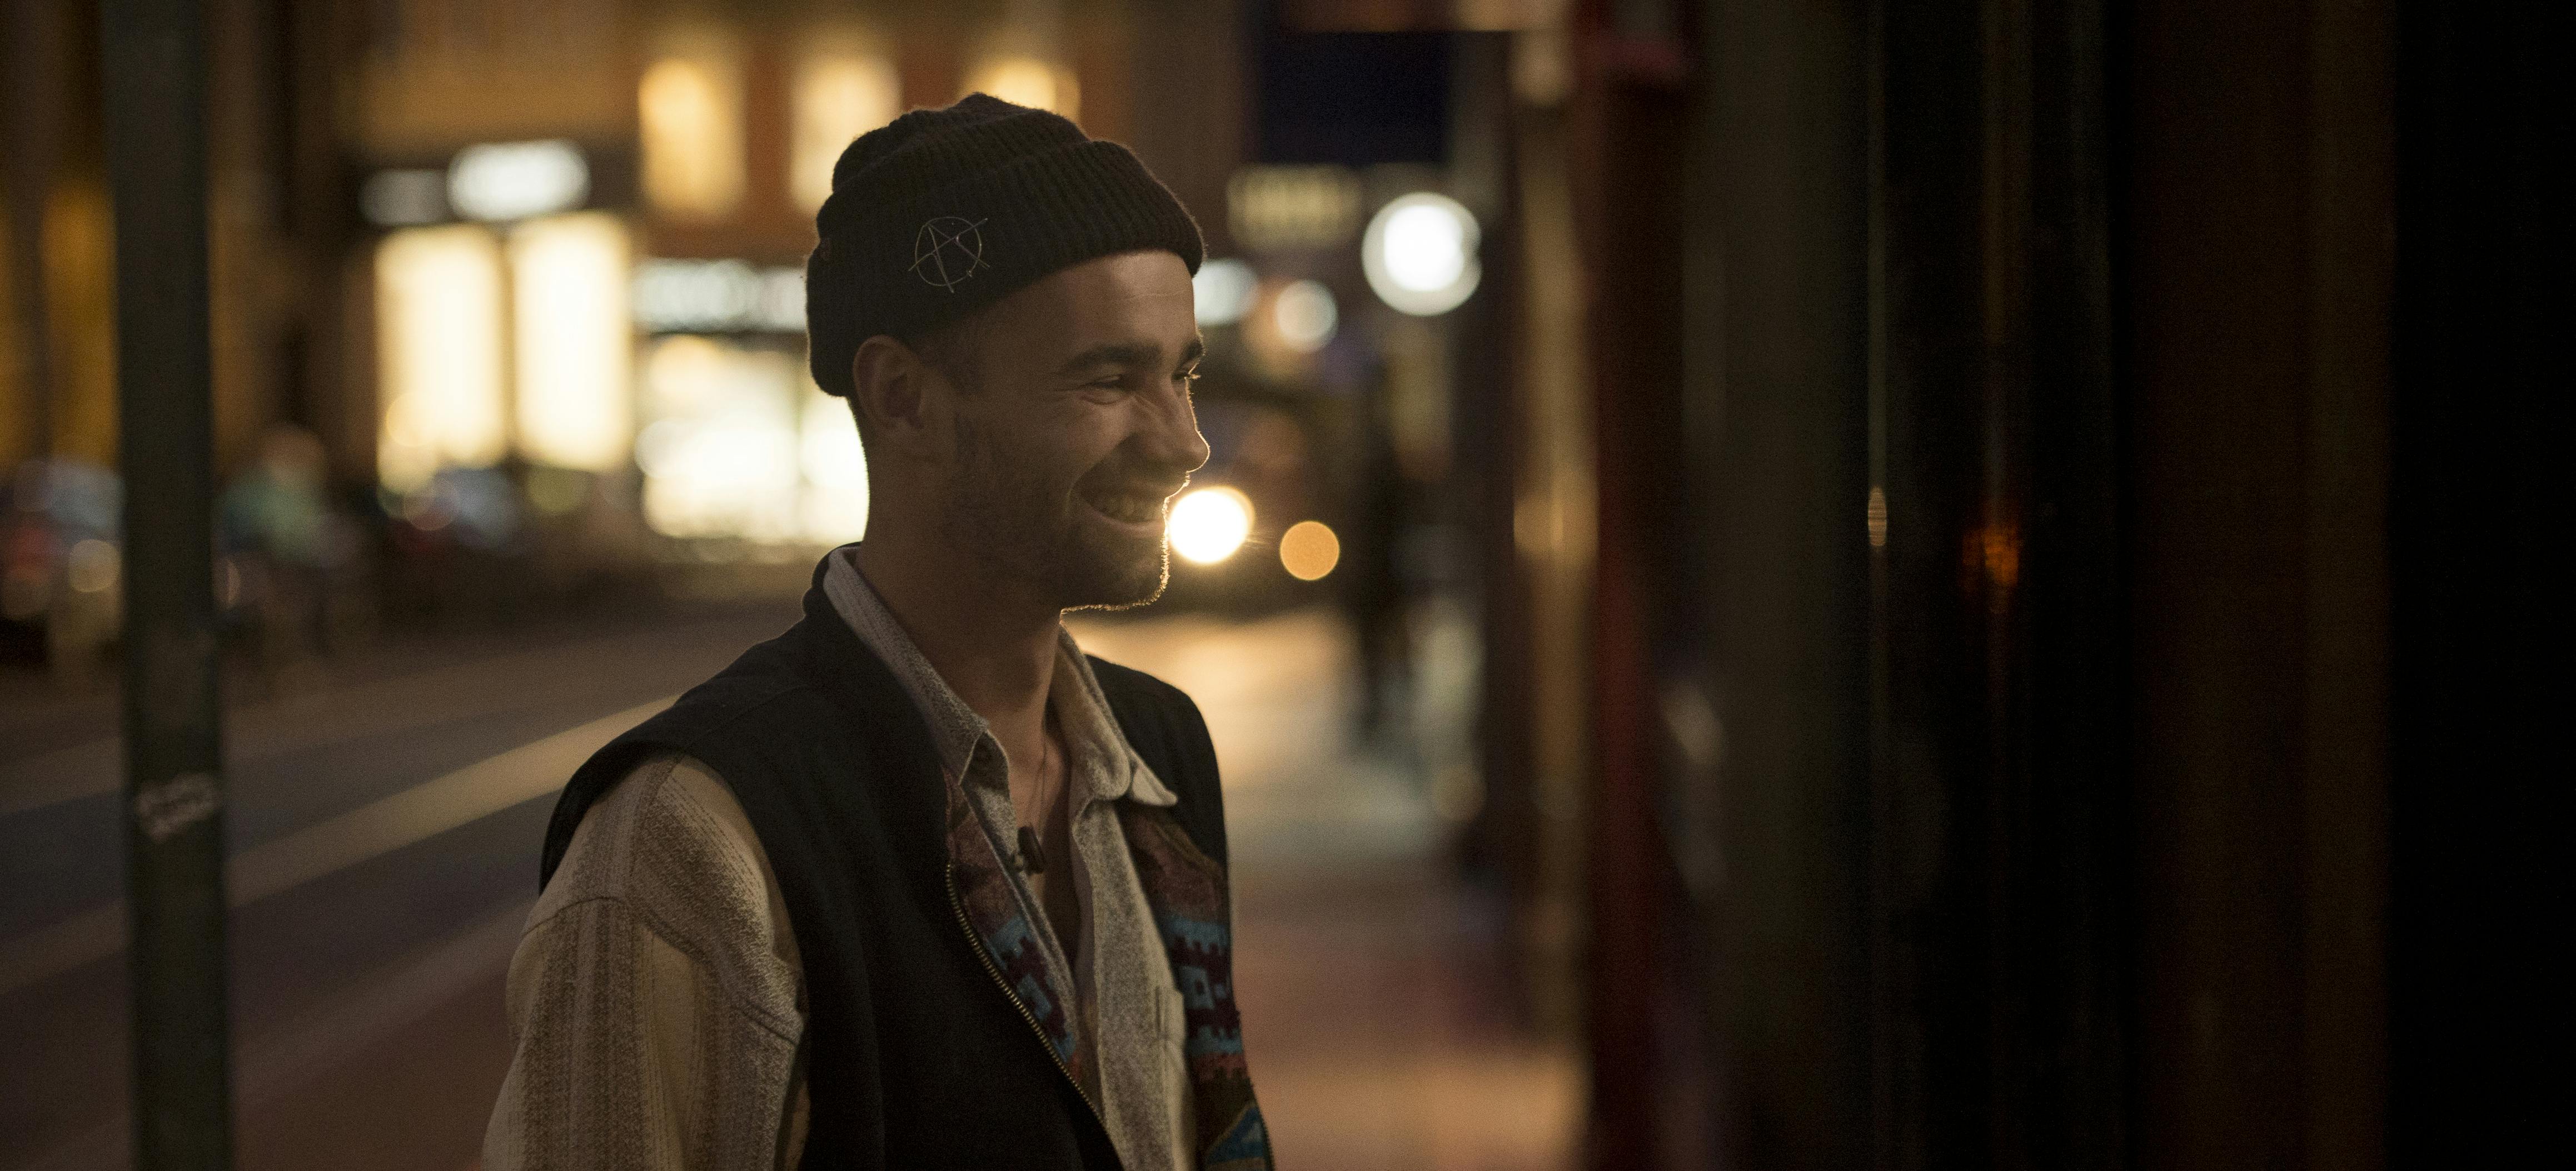 Image of Alex Hallford smiling at night with street lights in the background